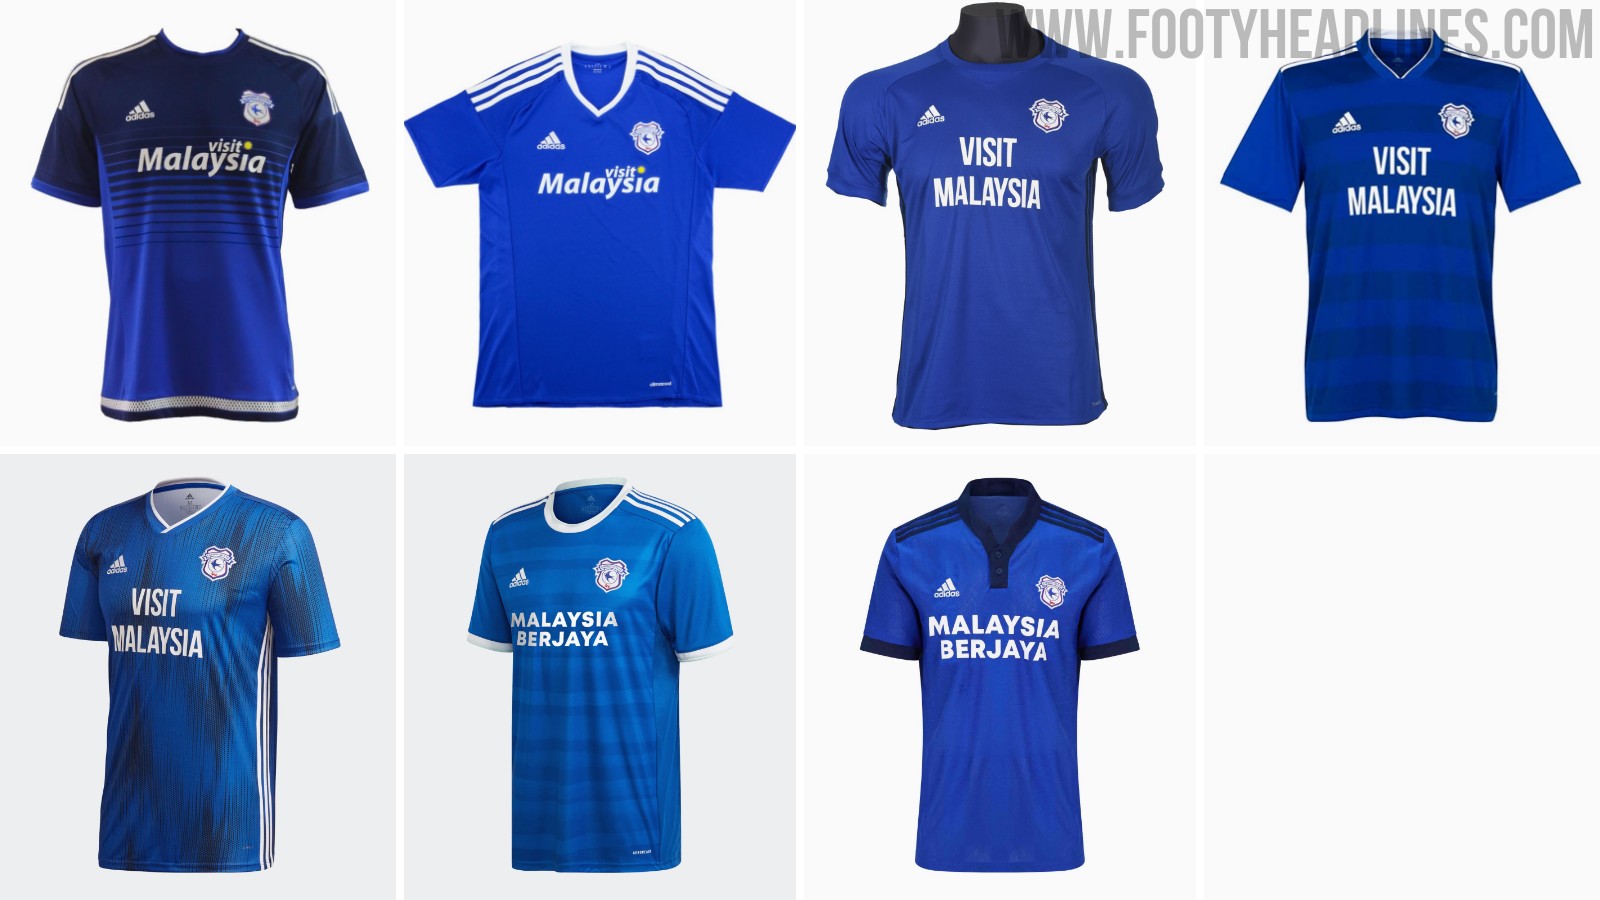 Cardiff City sell £100,000 worth of Adidas kit in record breaking